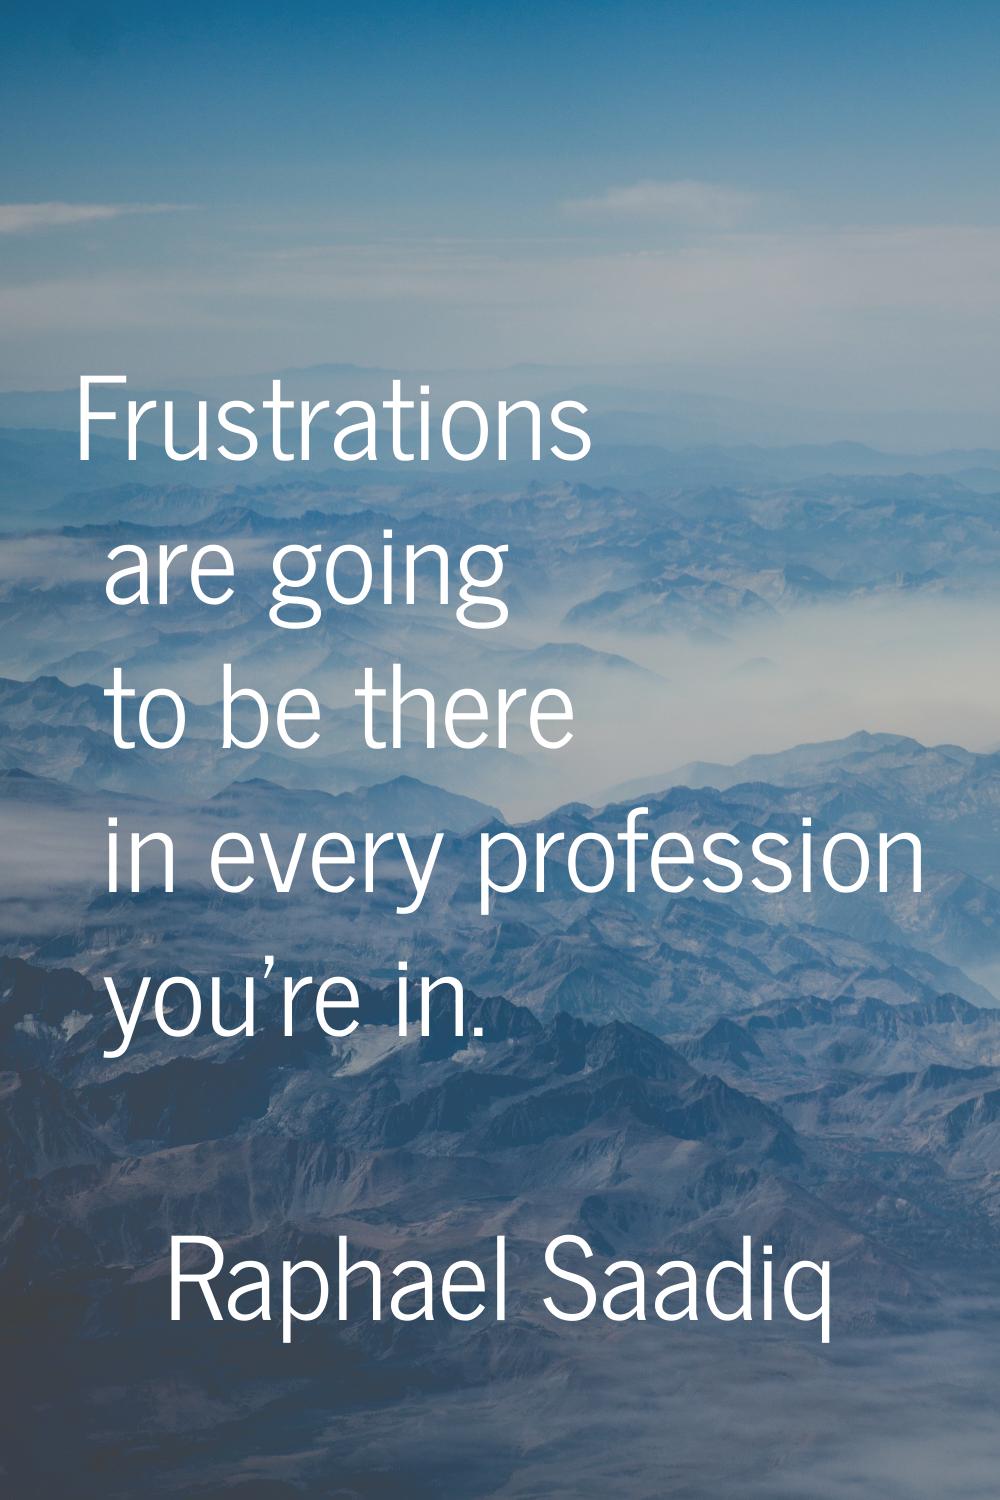 Frustrations are going to be there in every profession you're in.